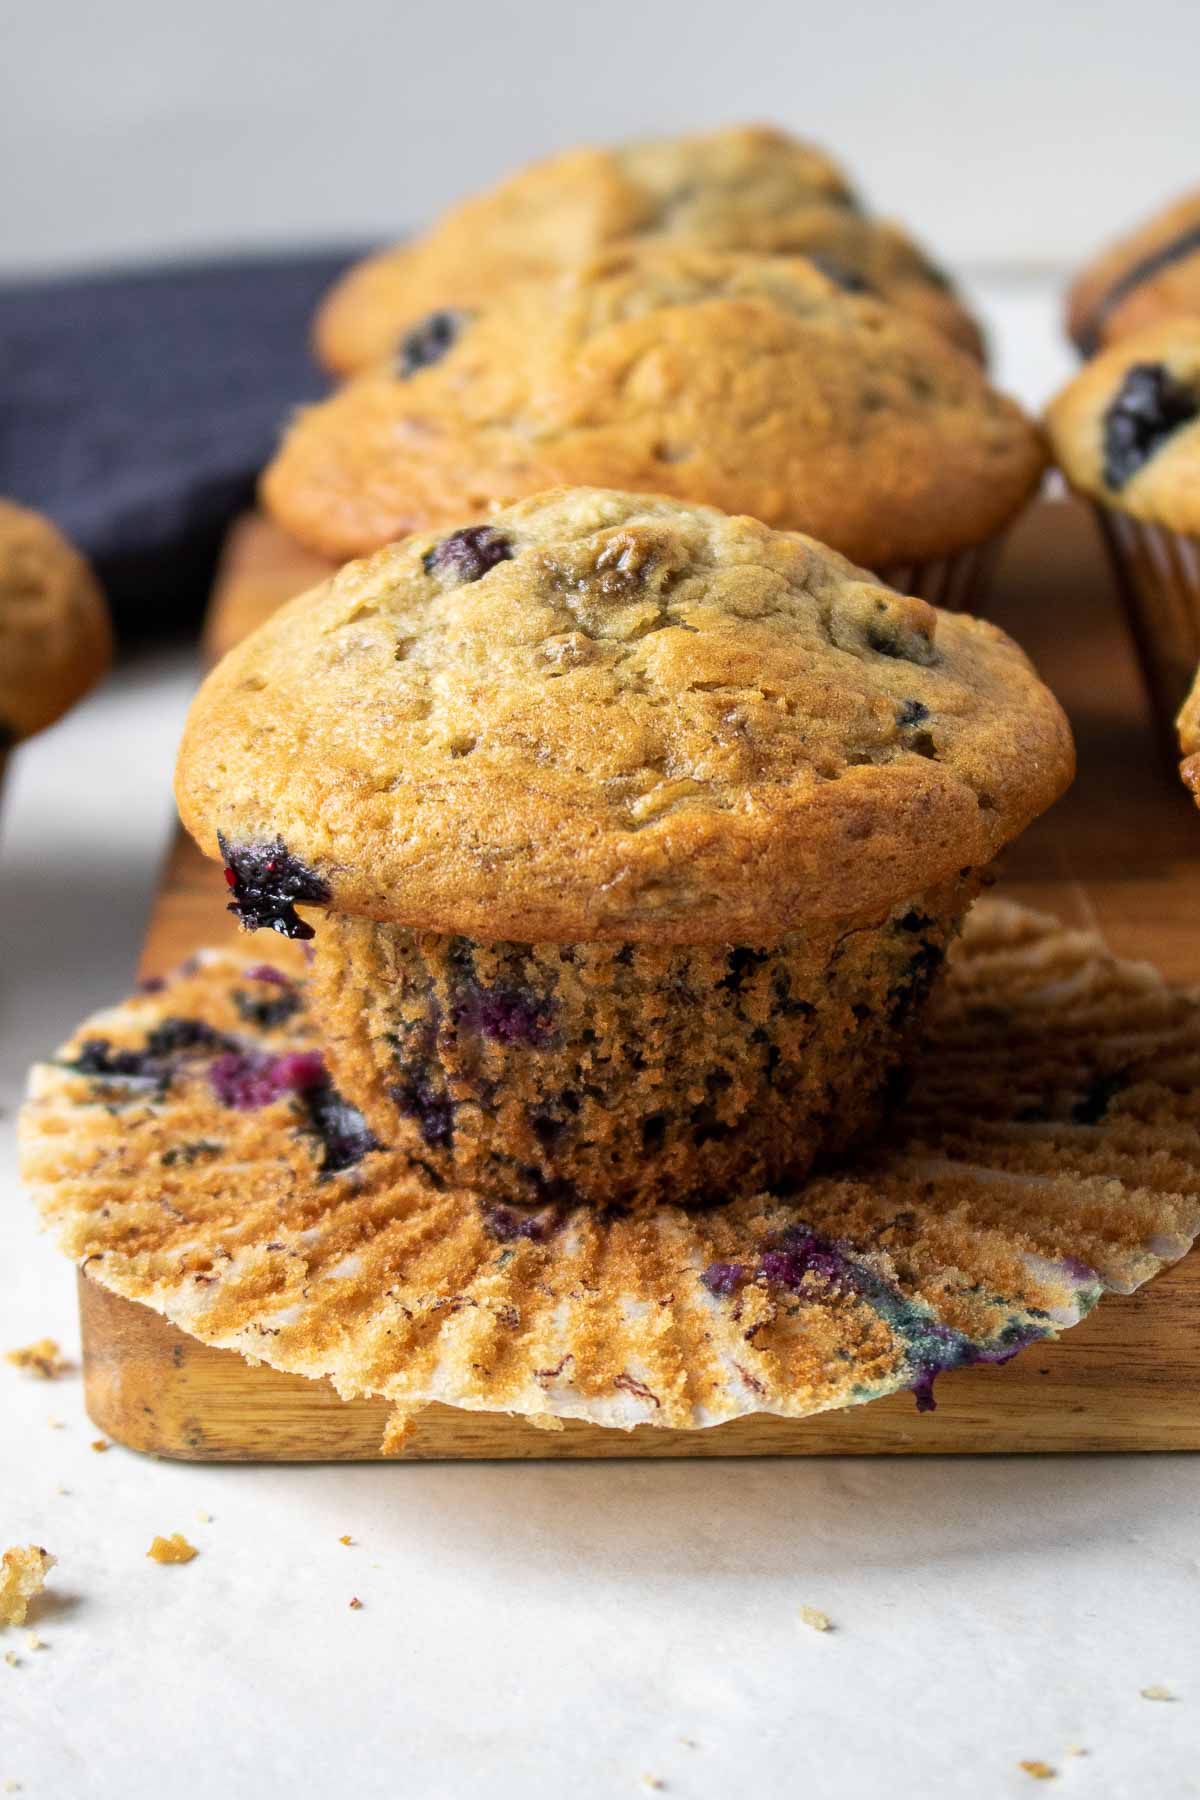 Healthy banana blueberry muffins in an open muffin wrapper on a cutting board.